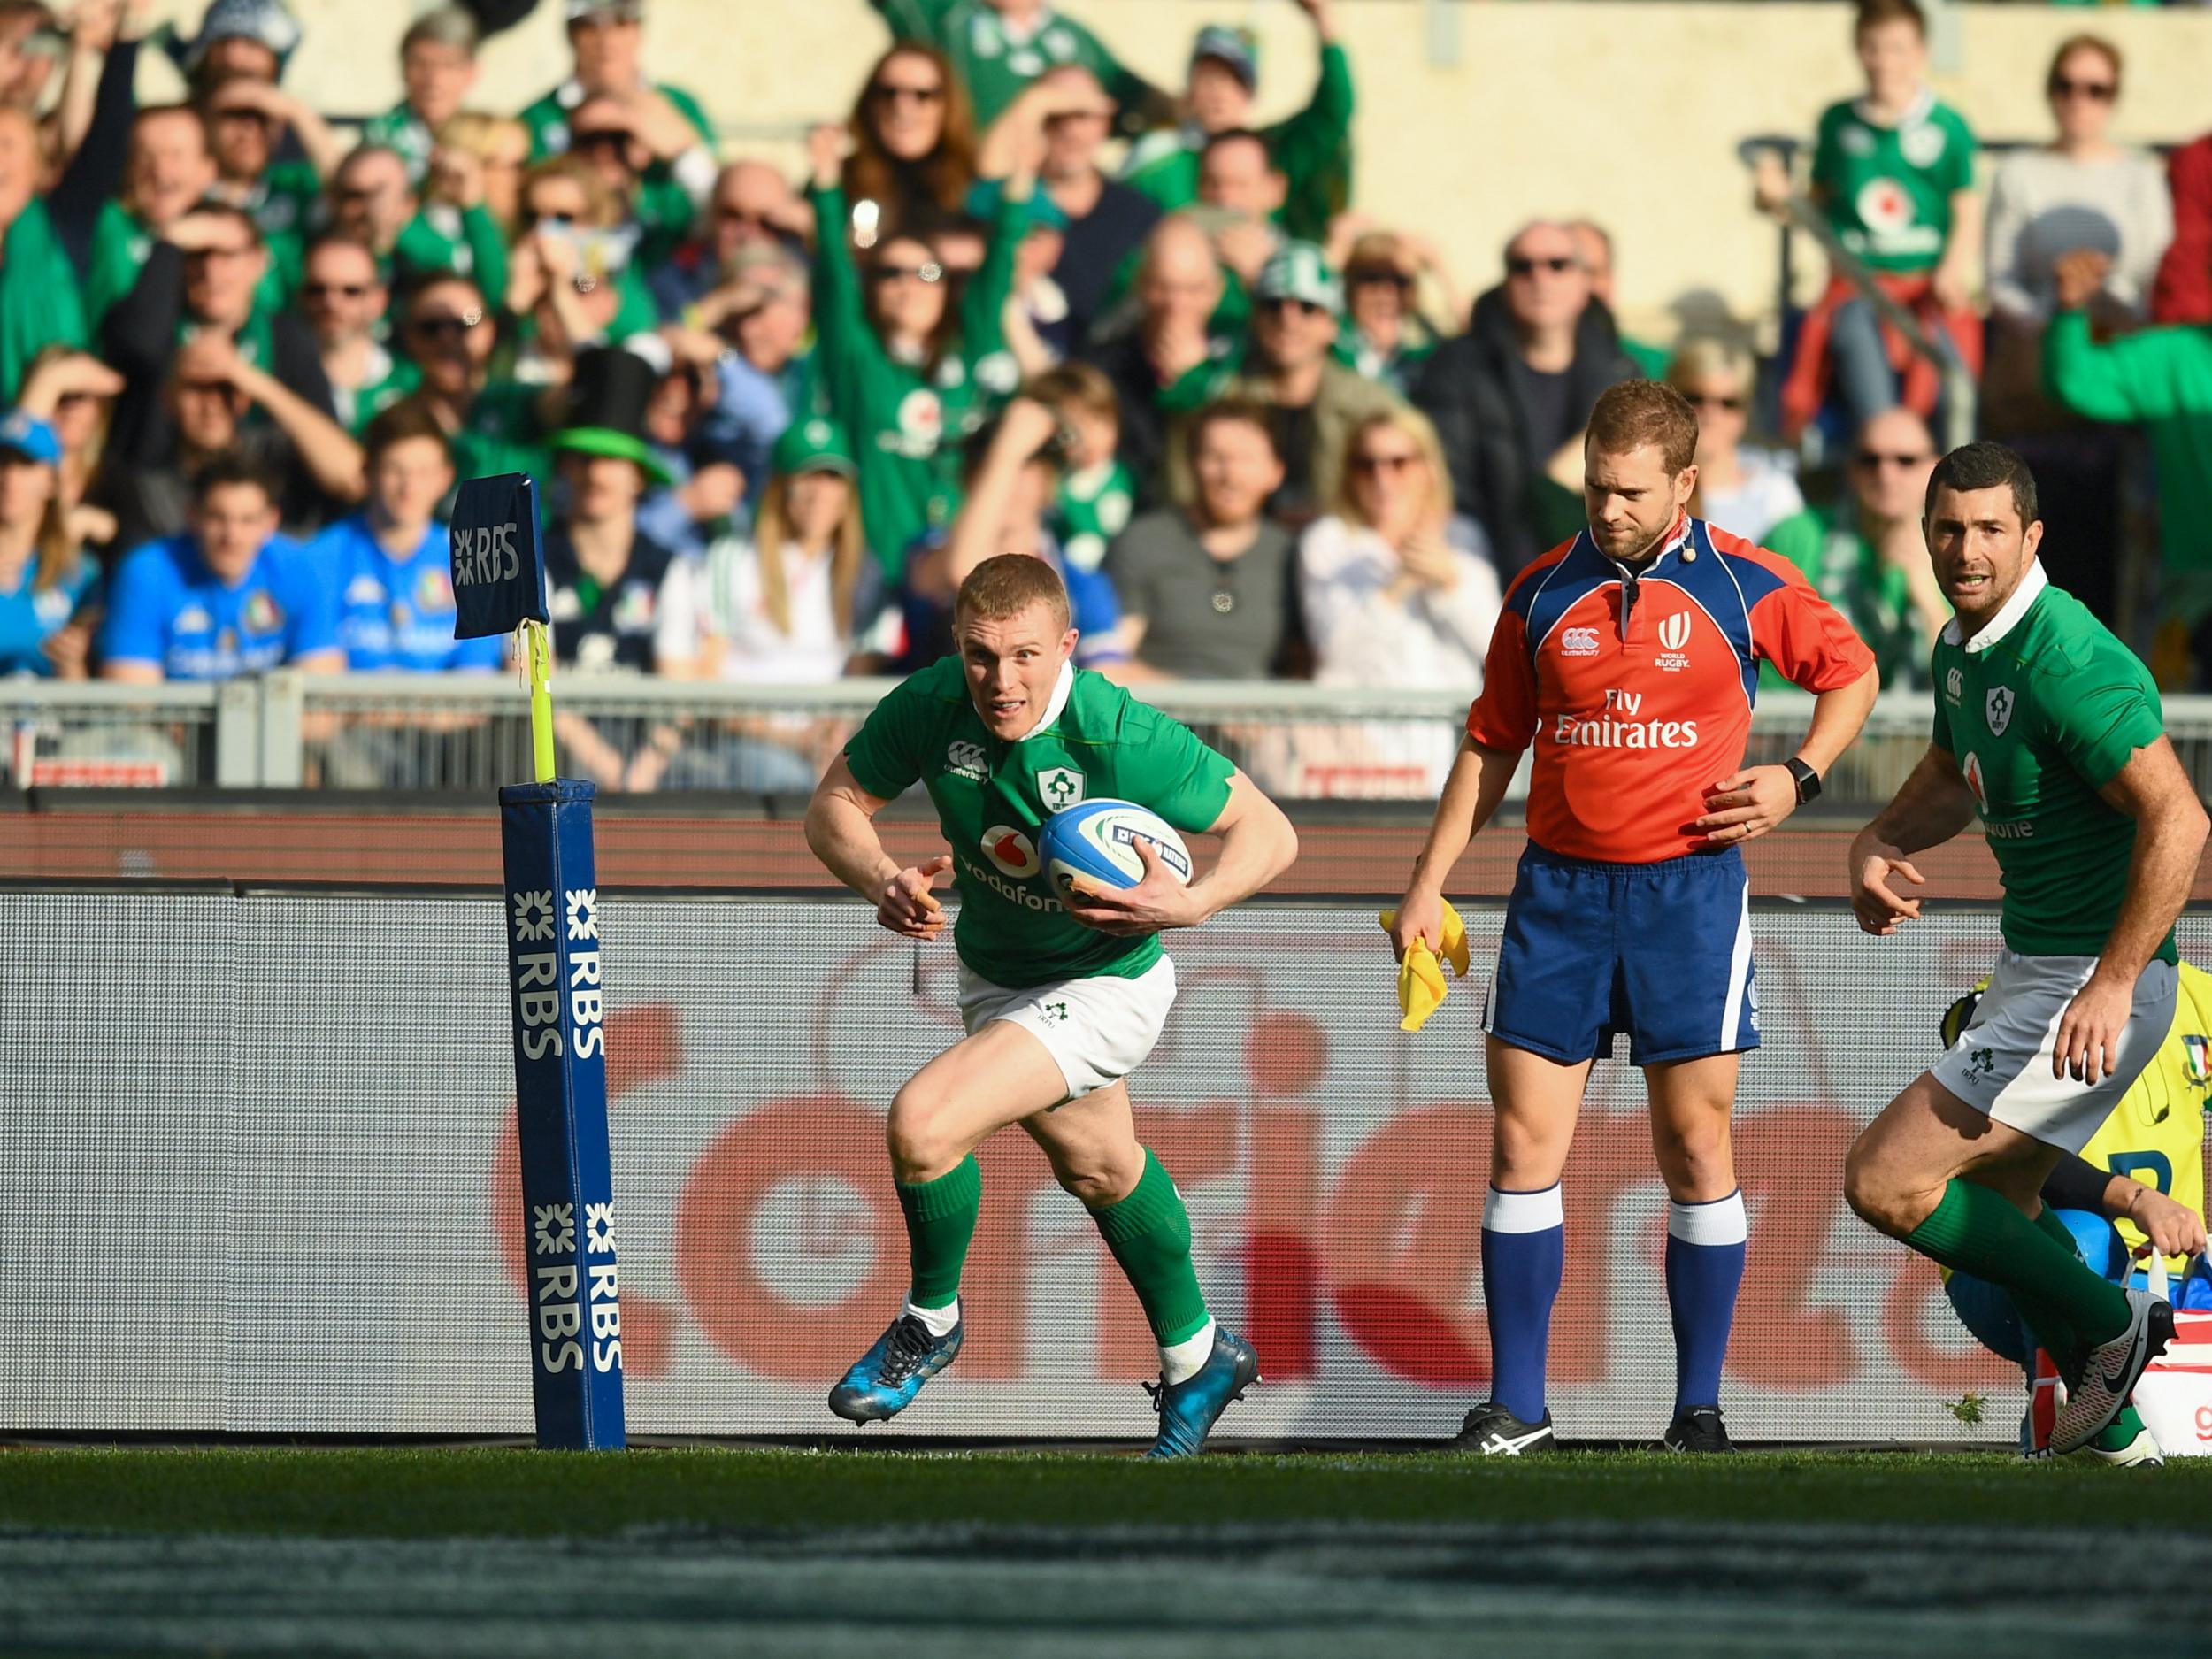 Ireland take on Italy with both teams looking for their first win of the Six Nations